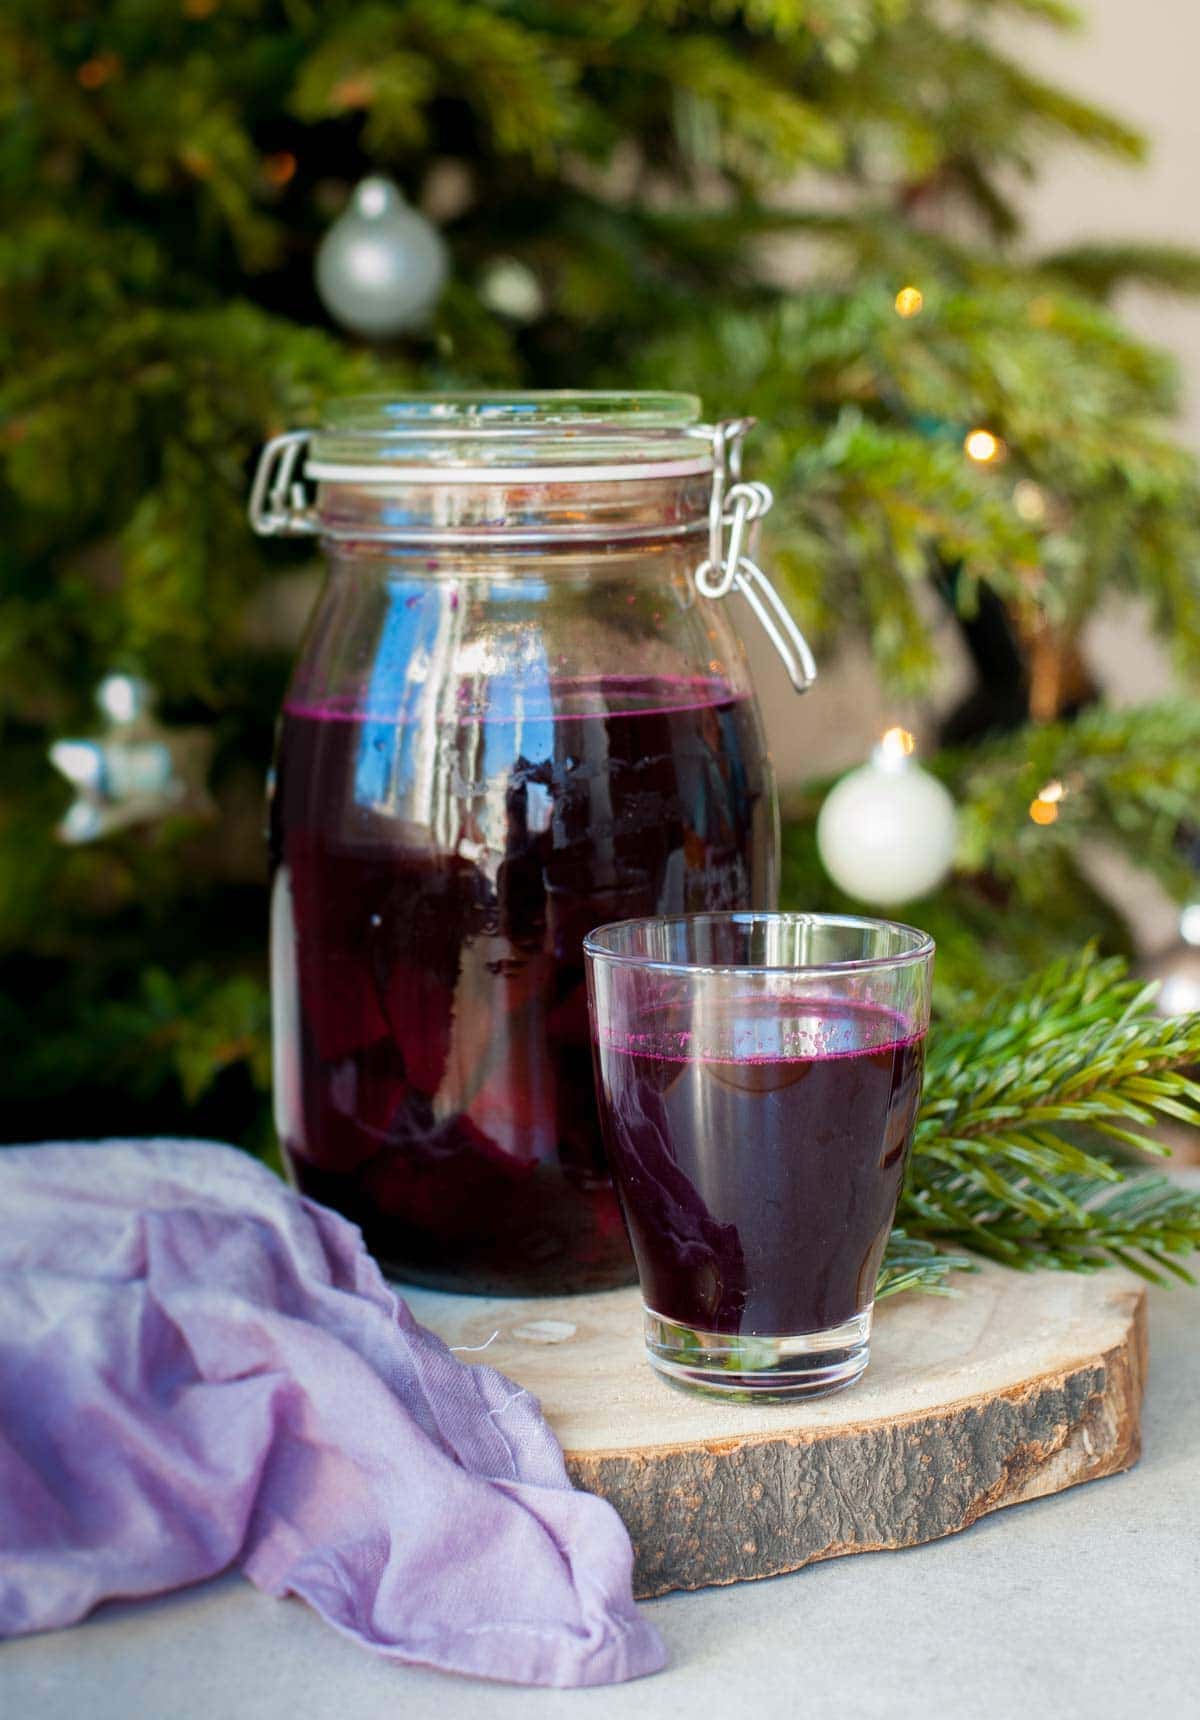 beet kvass in a jar and a glass, Christmas tree in the background